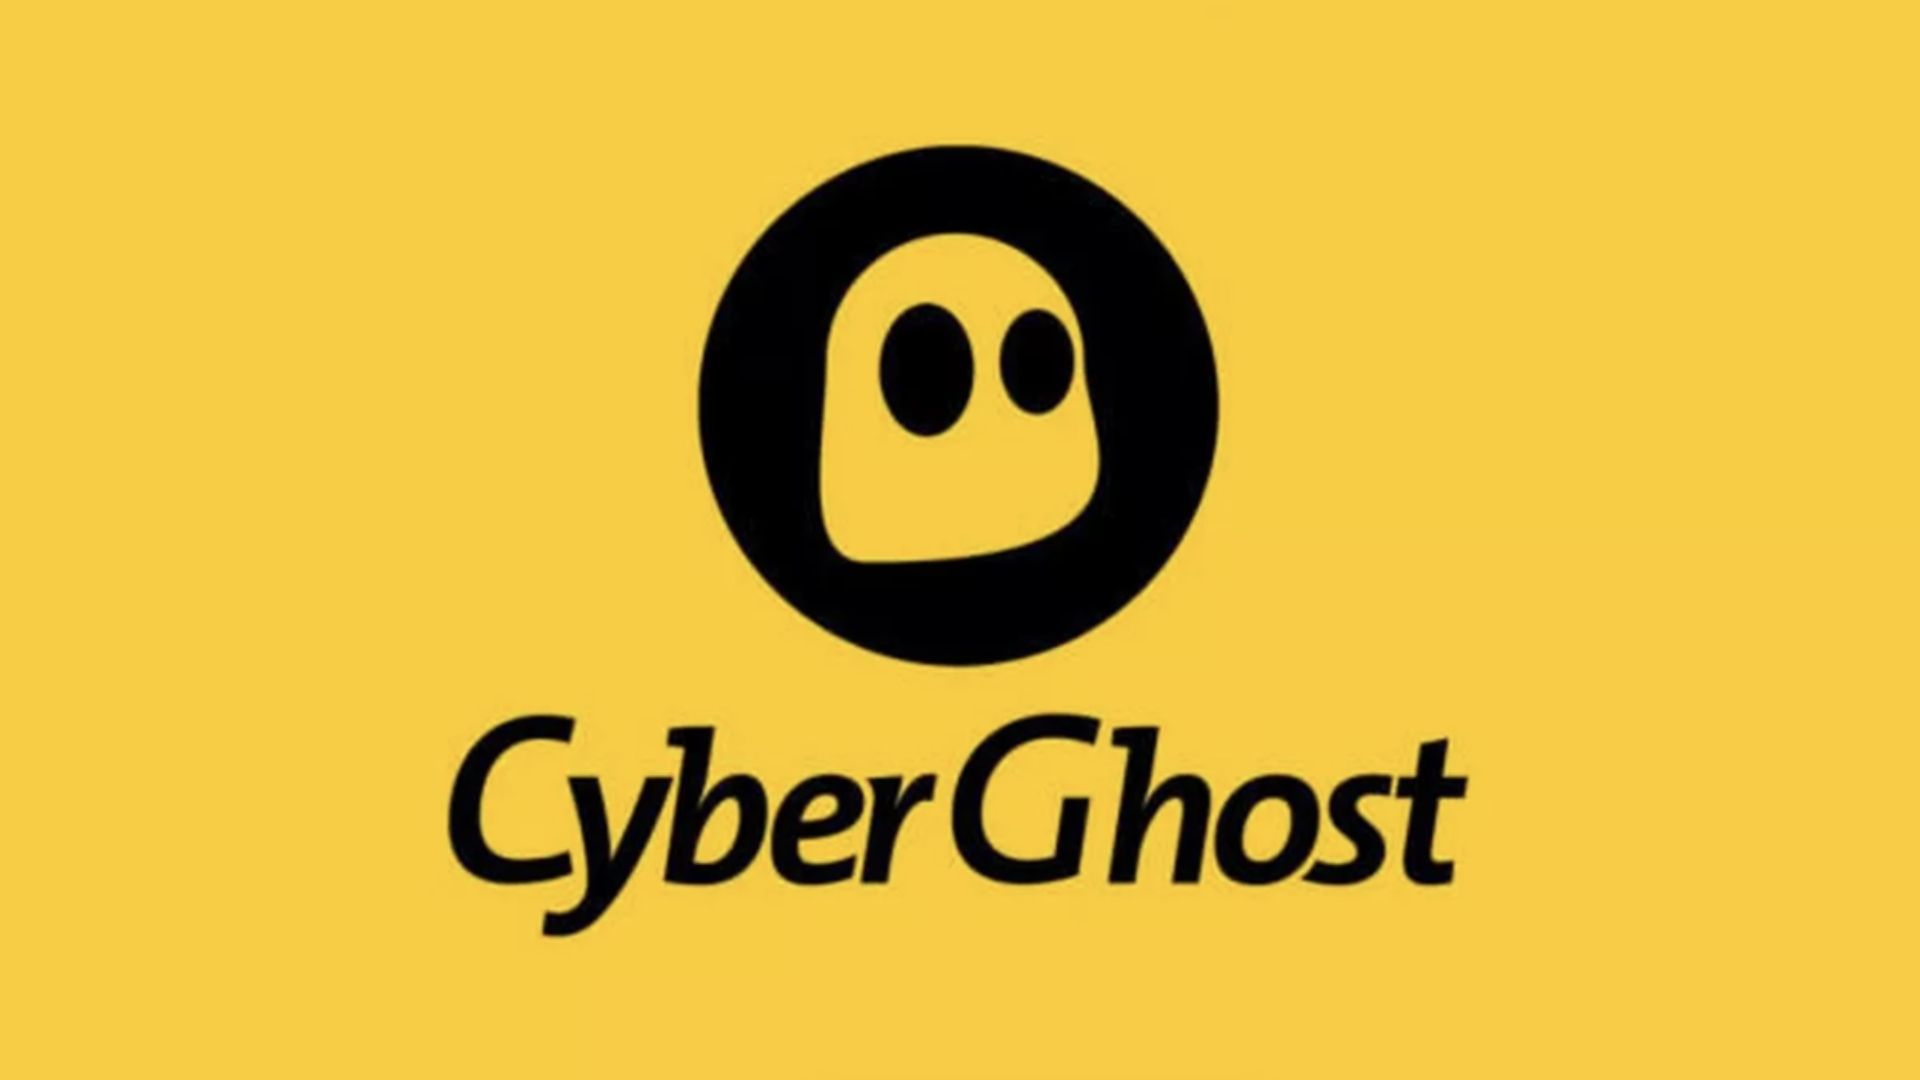 VPN costs for CyberGhost. Image shows the company logo.